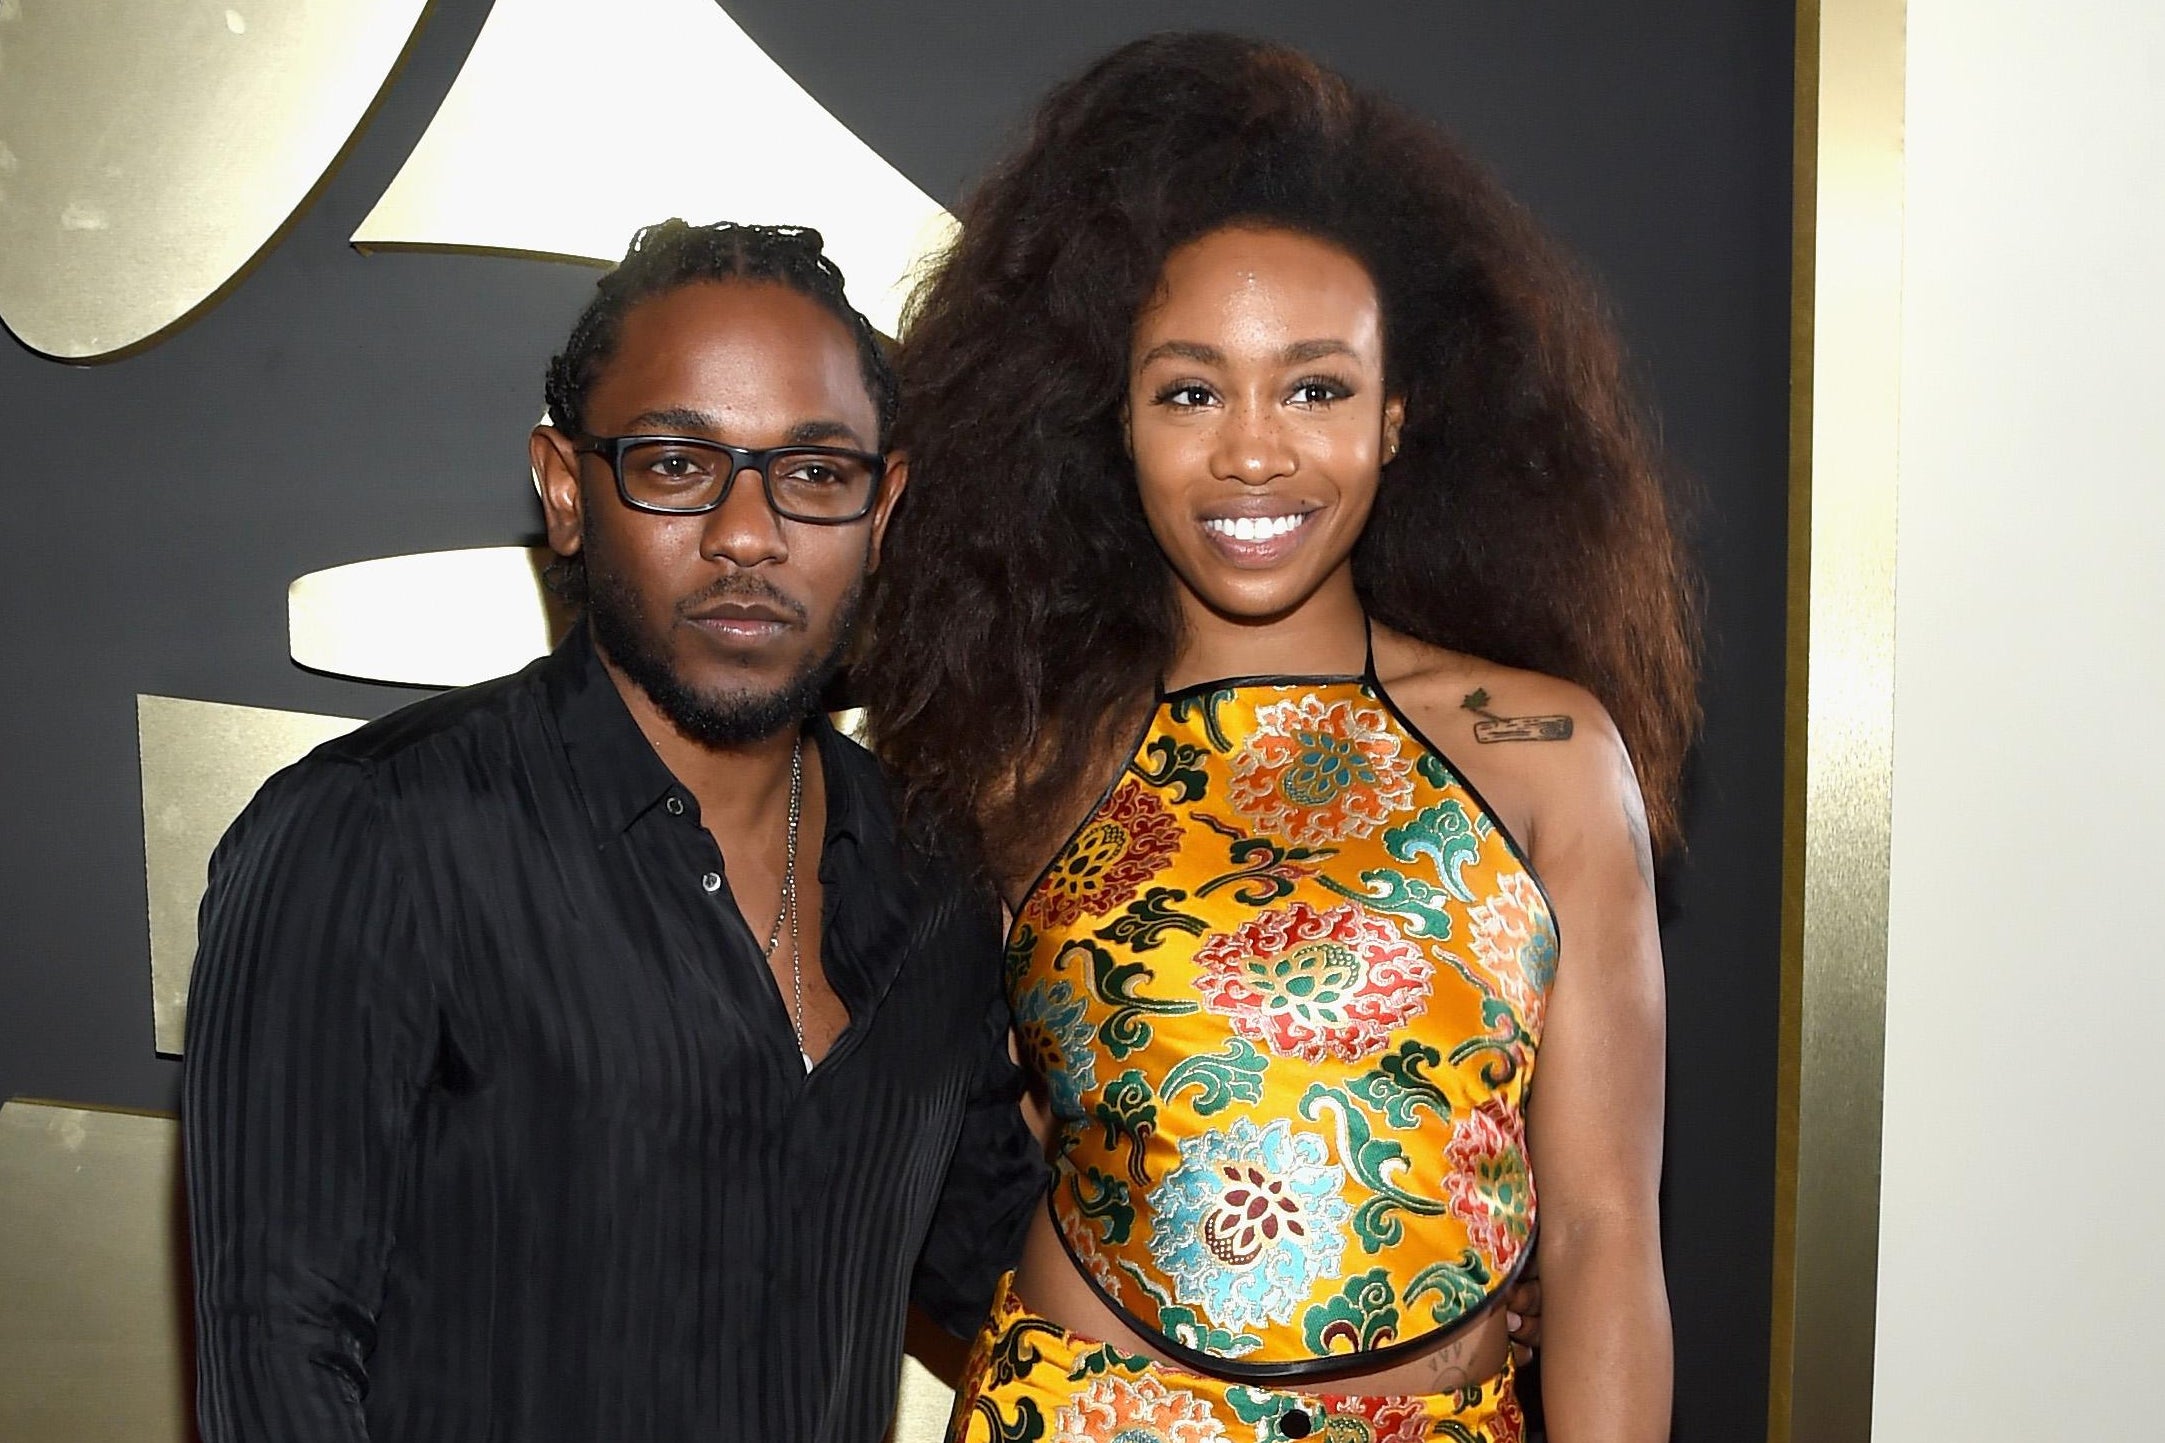 Rapper Kendrick Lamar and SZA attend The 58th Grammy Awards on February 15, 2016 in Los Angeles, California.